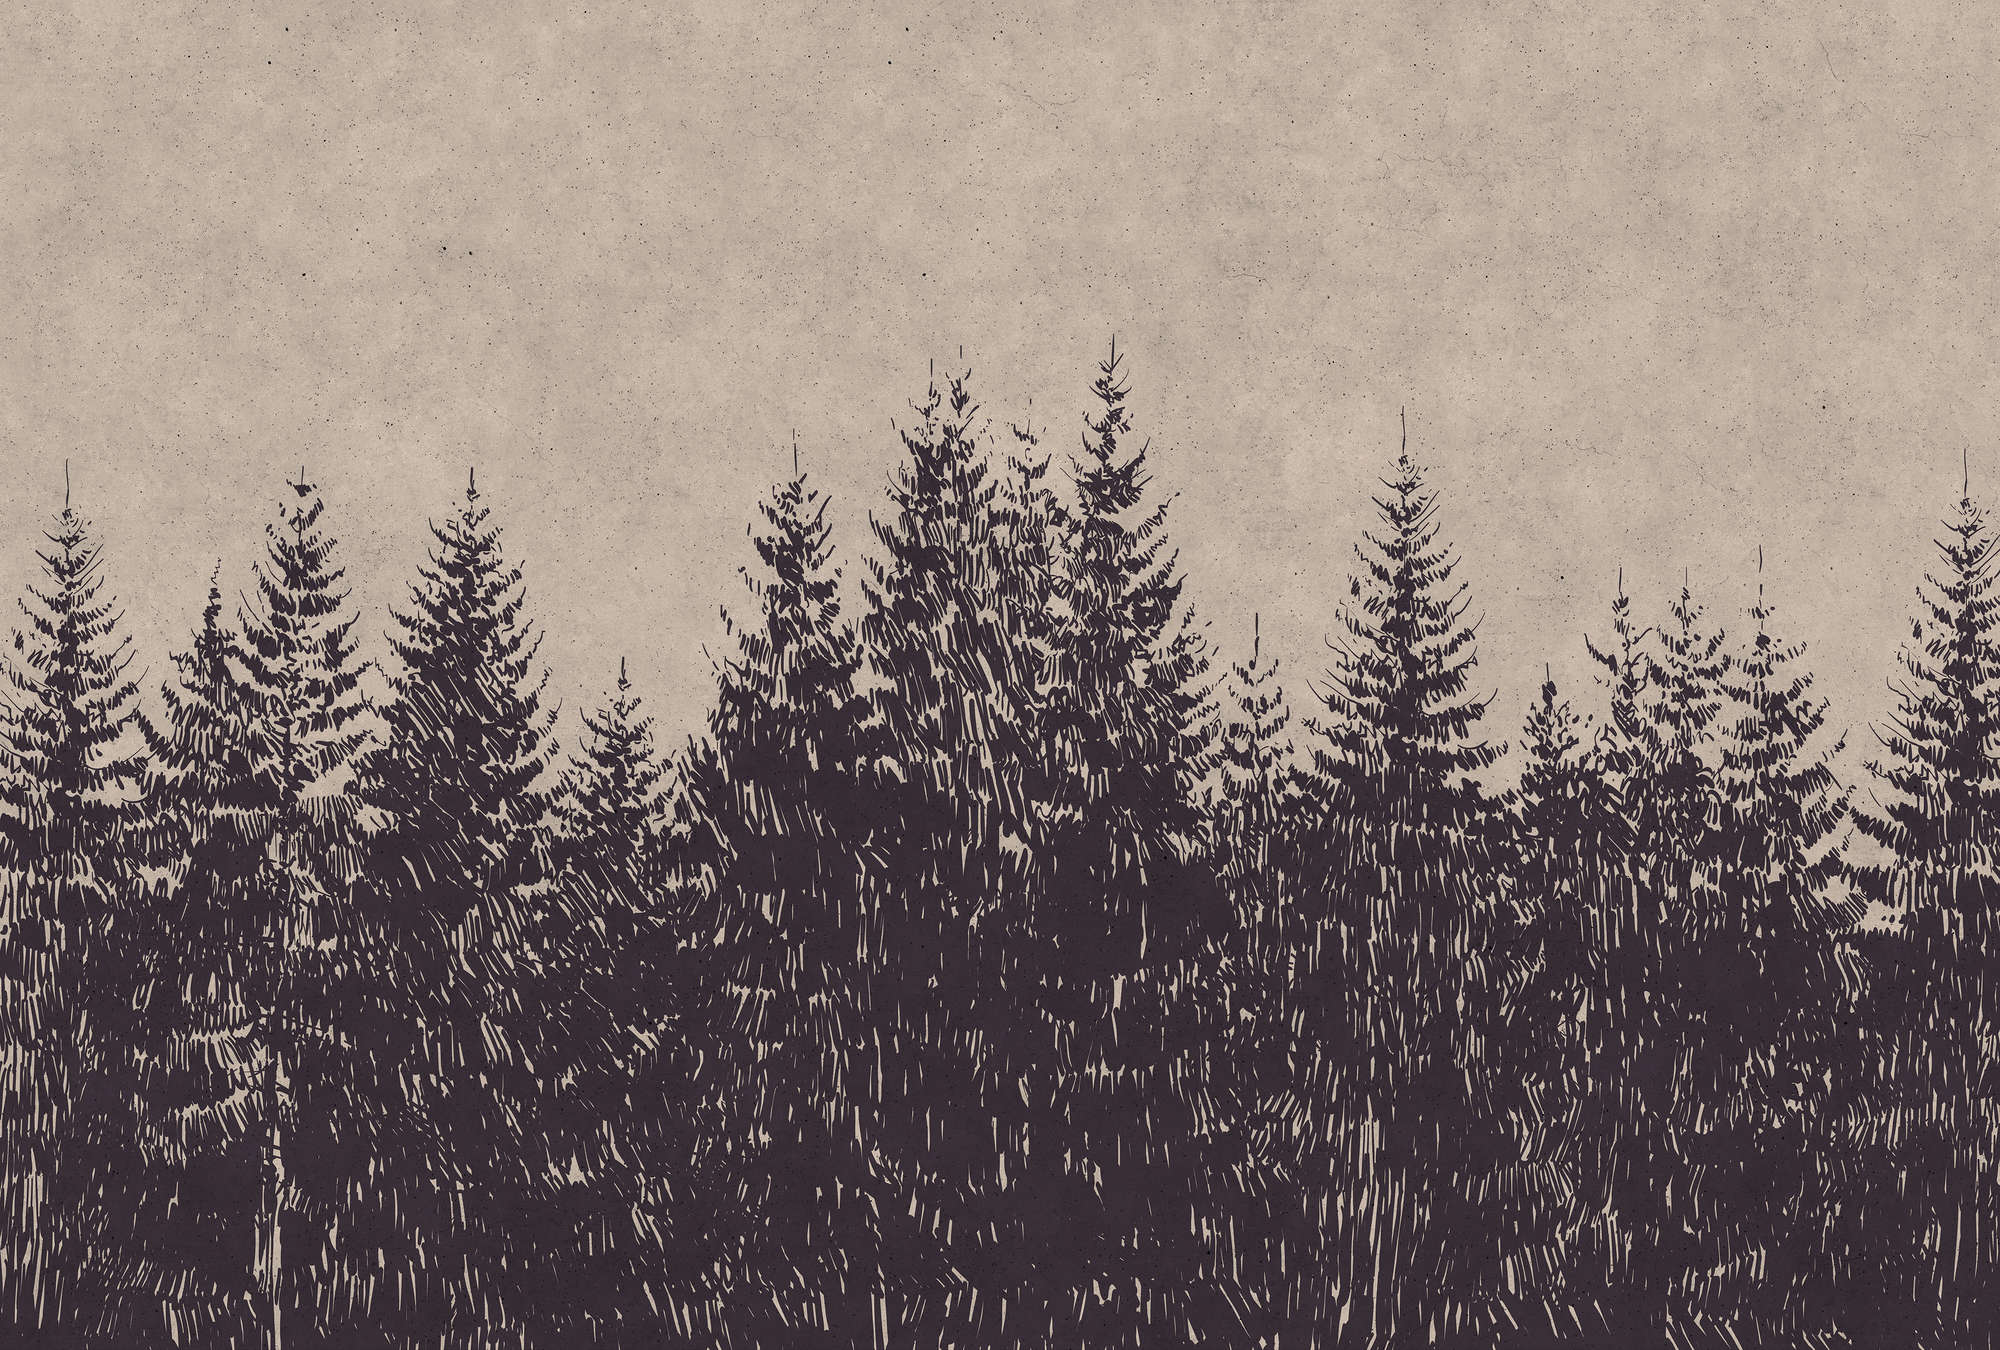             Photo wallpaper forest fir trees in drawing style - Walls by Patel
        